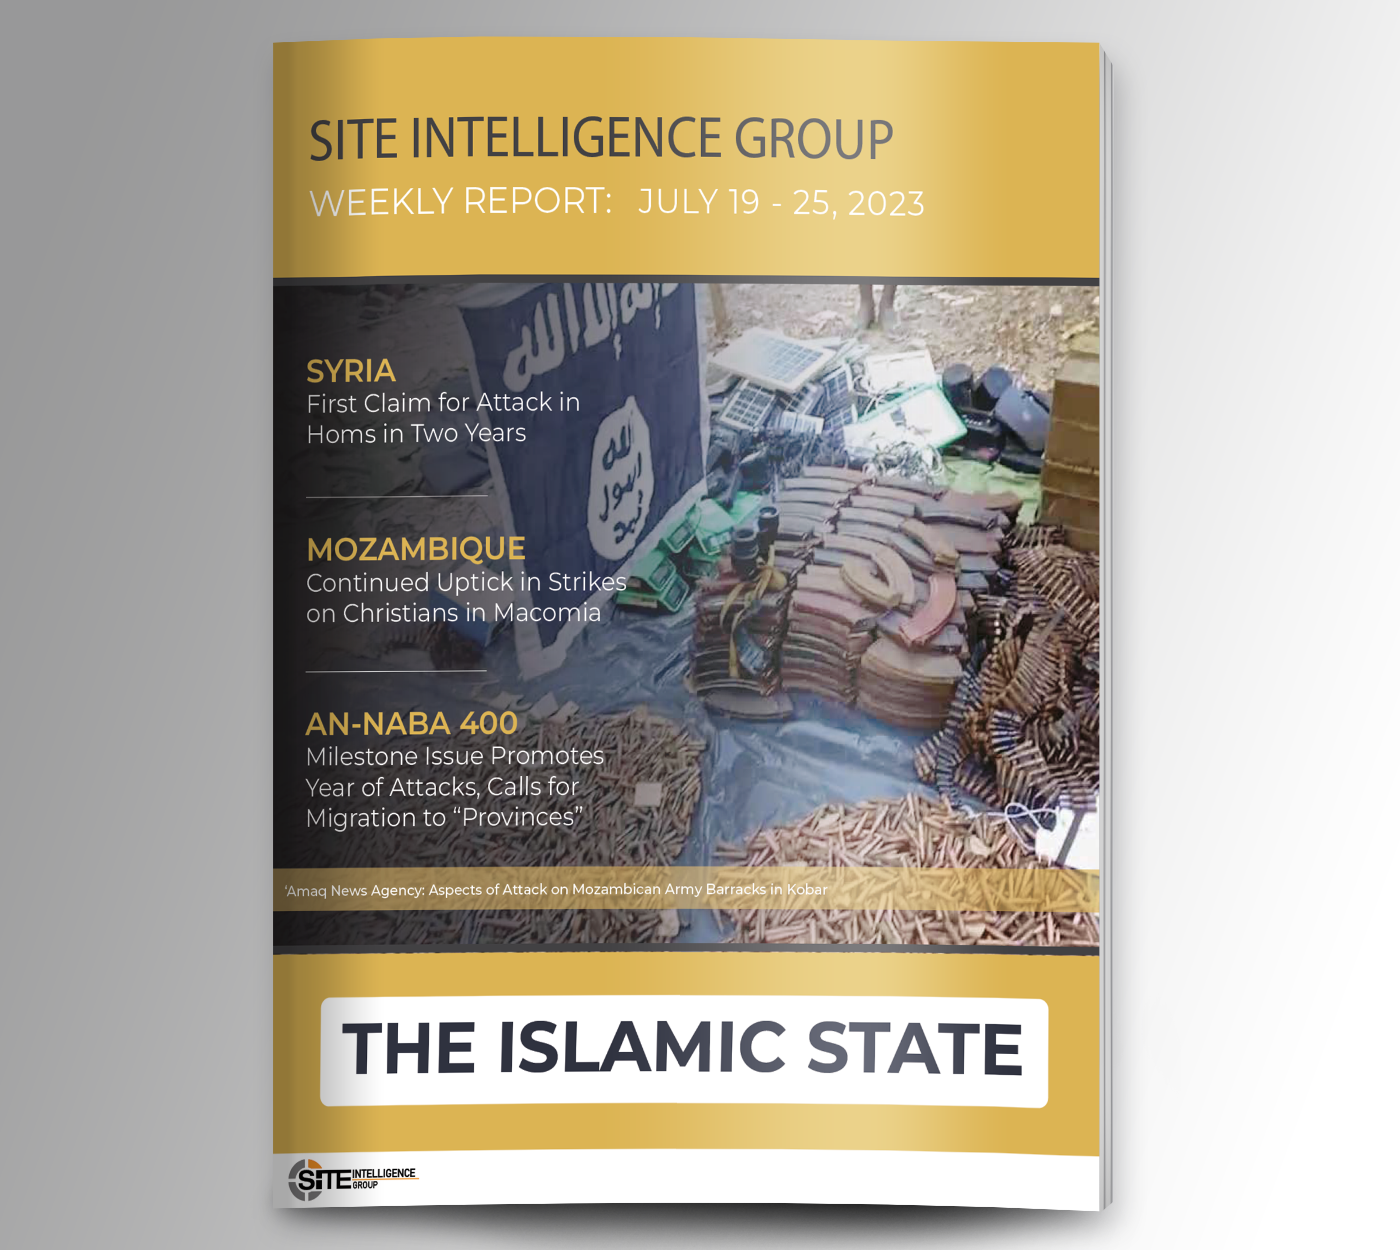 Weekly inSITE on the Islamic State for July 19-25, 2023